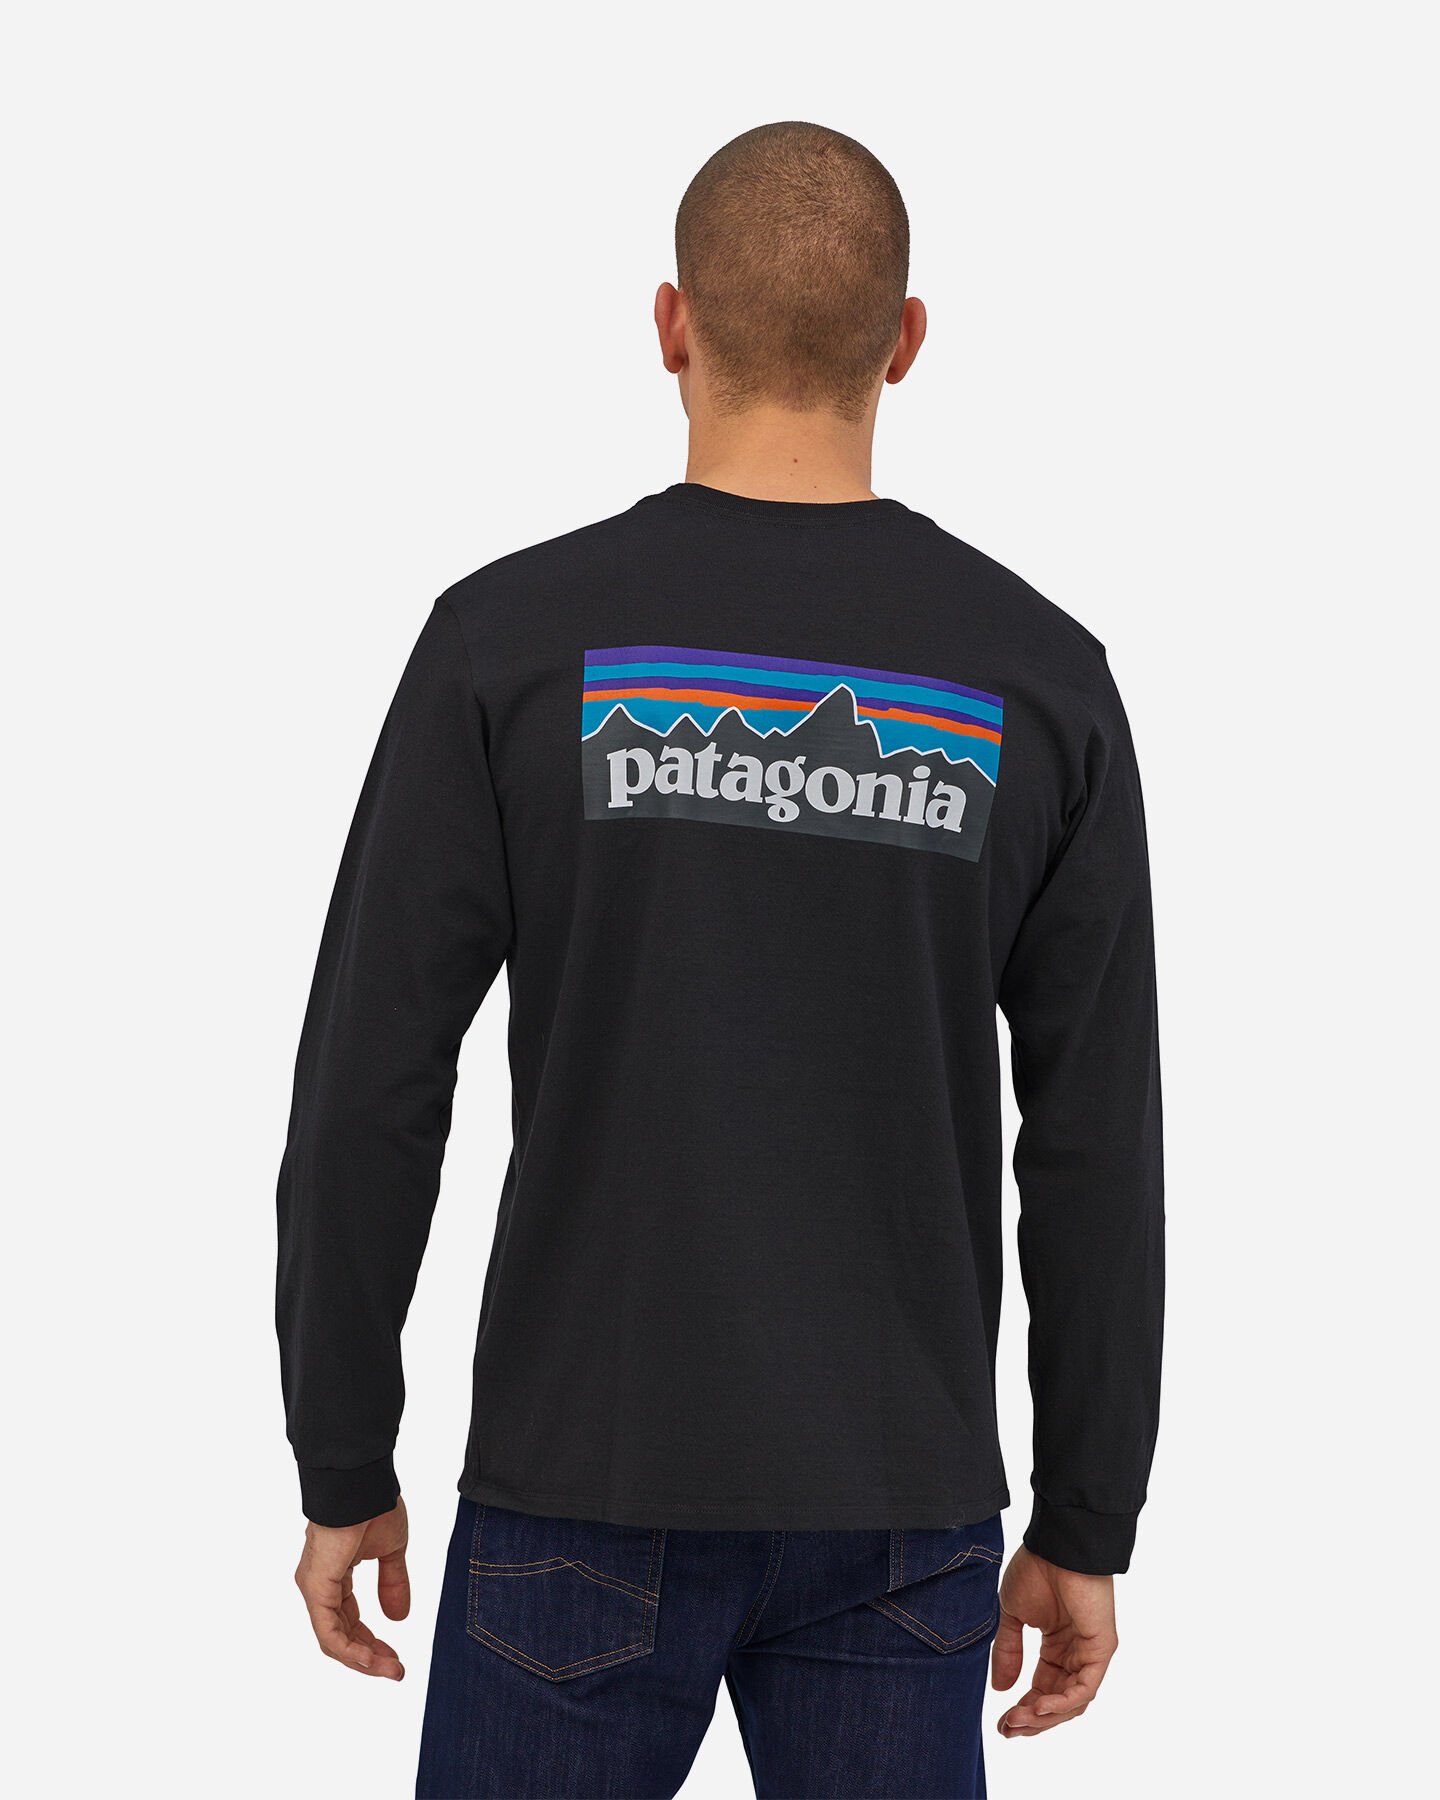  T-Shirt PATAGONIA P-6 LOGO M S4089229|BLK|XL scatto 1